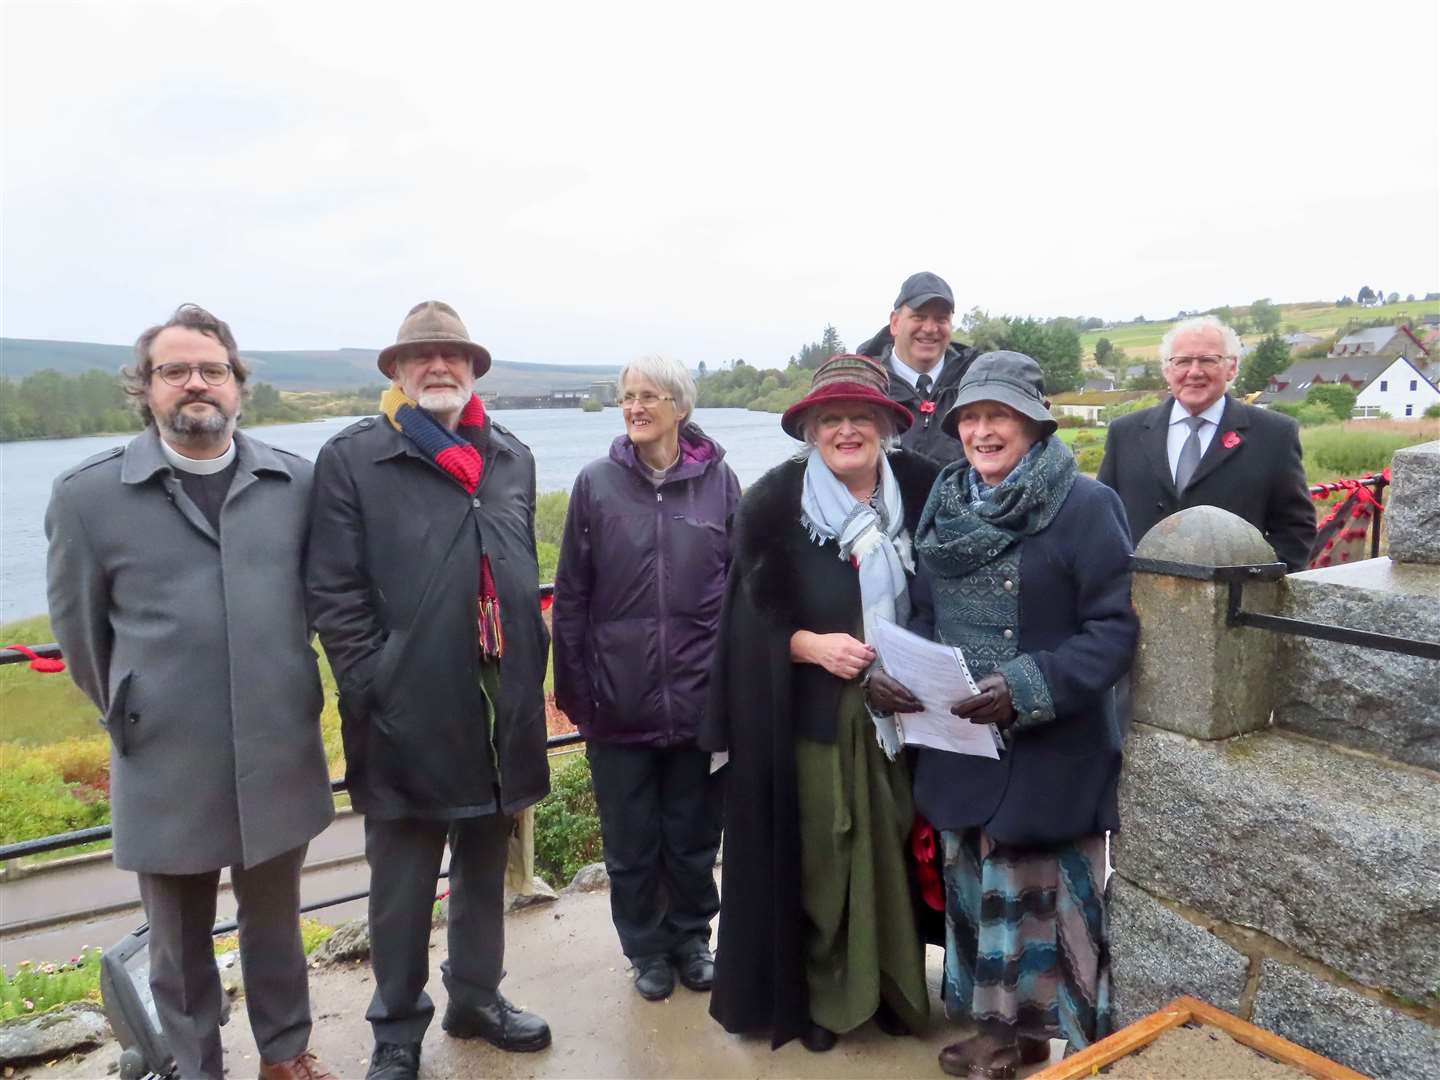 The service was led by Sandy Sutherland of Lairg Christian Fellowship and contributions were made by others. Picture: Tracie Drummond